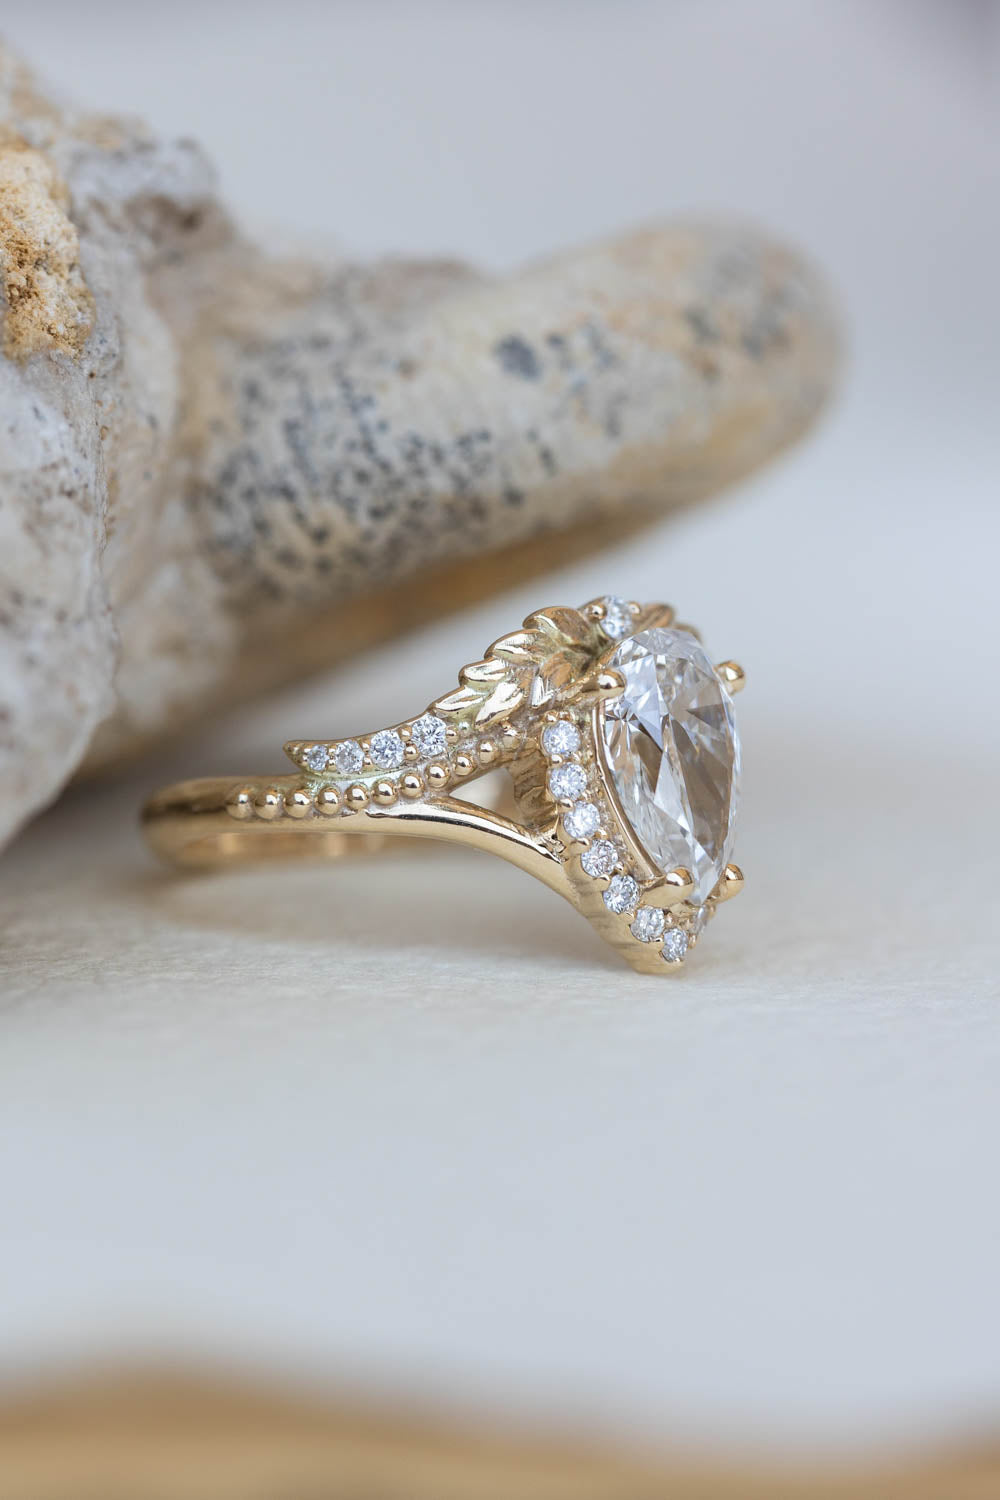 Sparkling lab grown diamond engagement ring, antique style gold ring with diamonds / Lyonella - Eden Garden Jewelry™